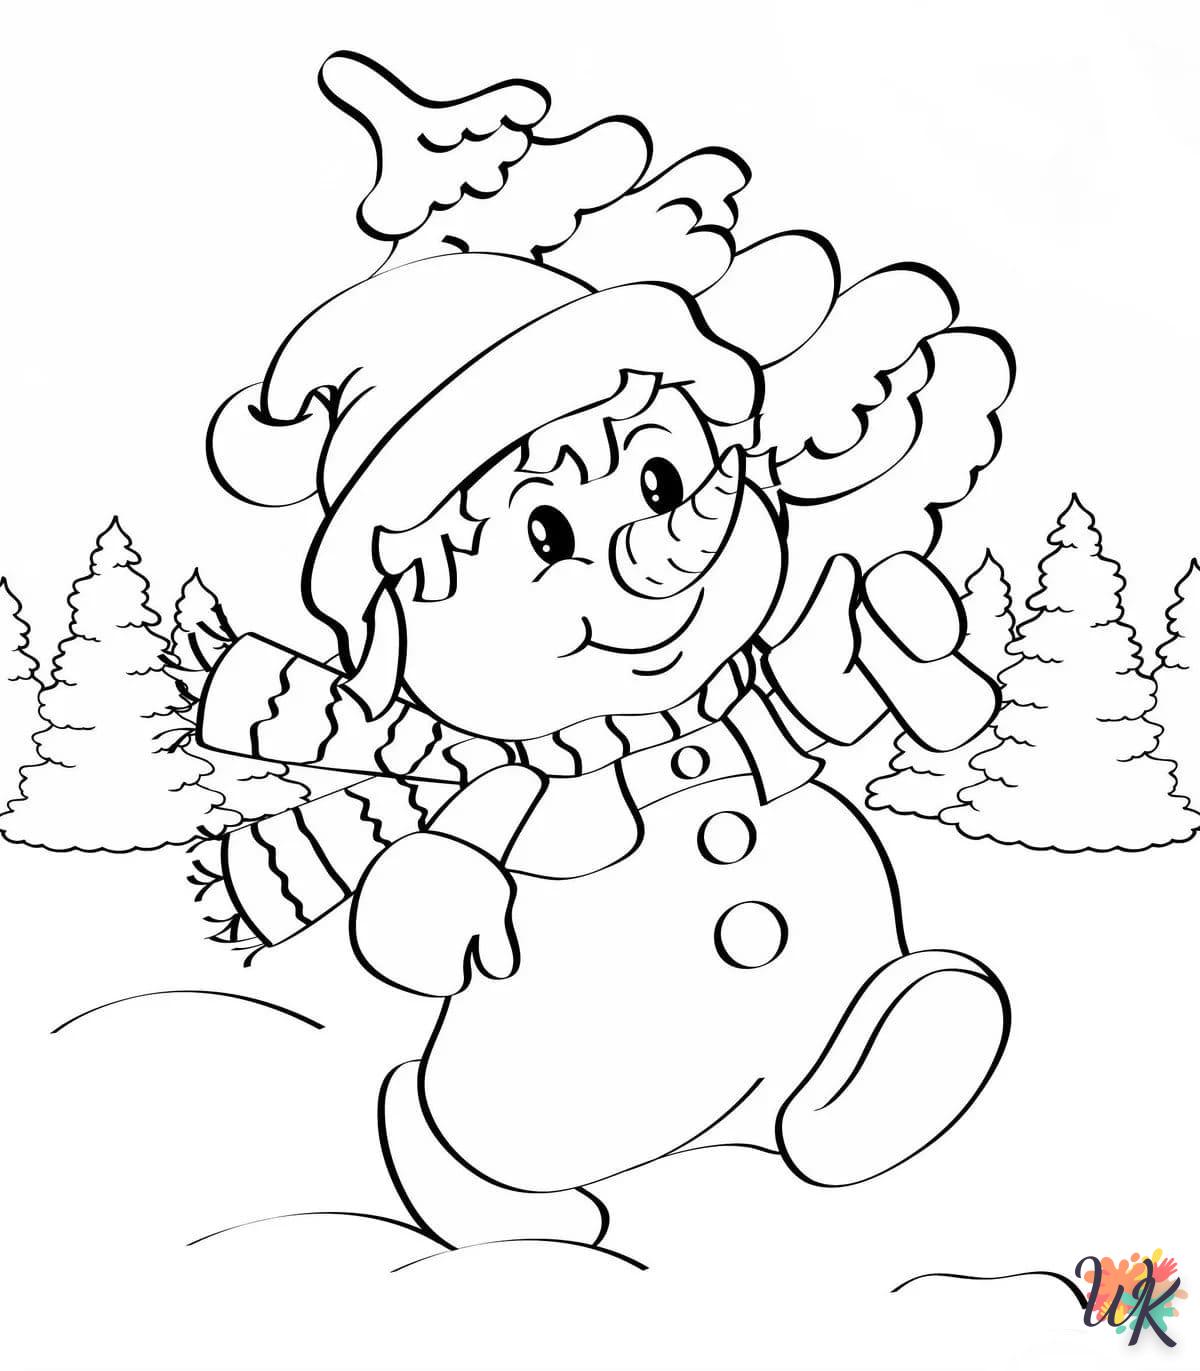 Snowman coloring page to print for children aged 5